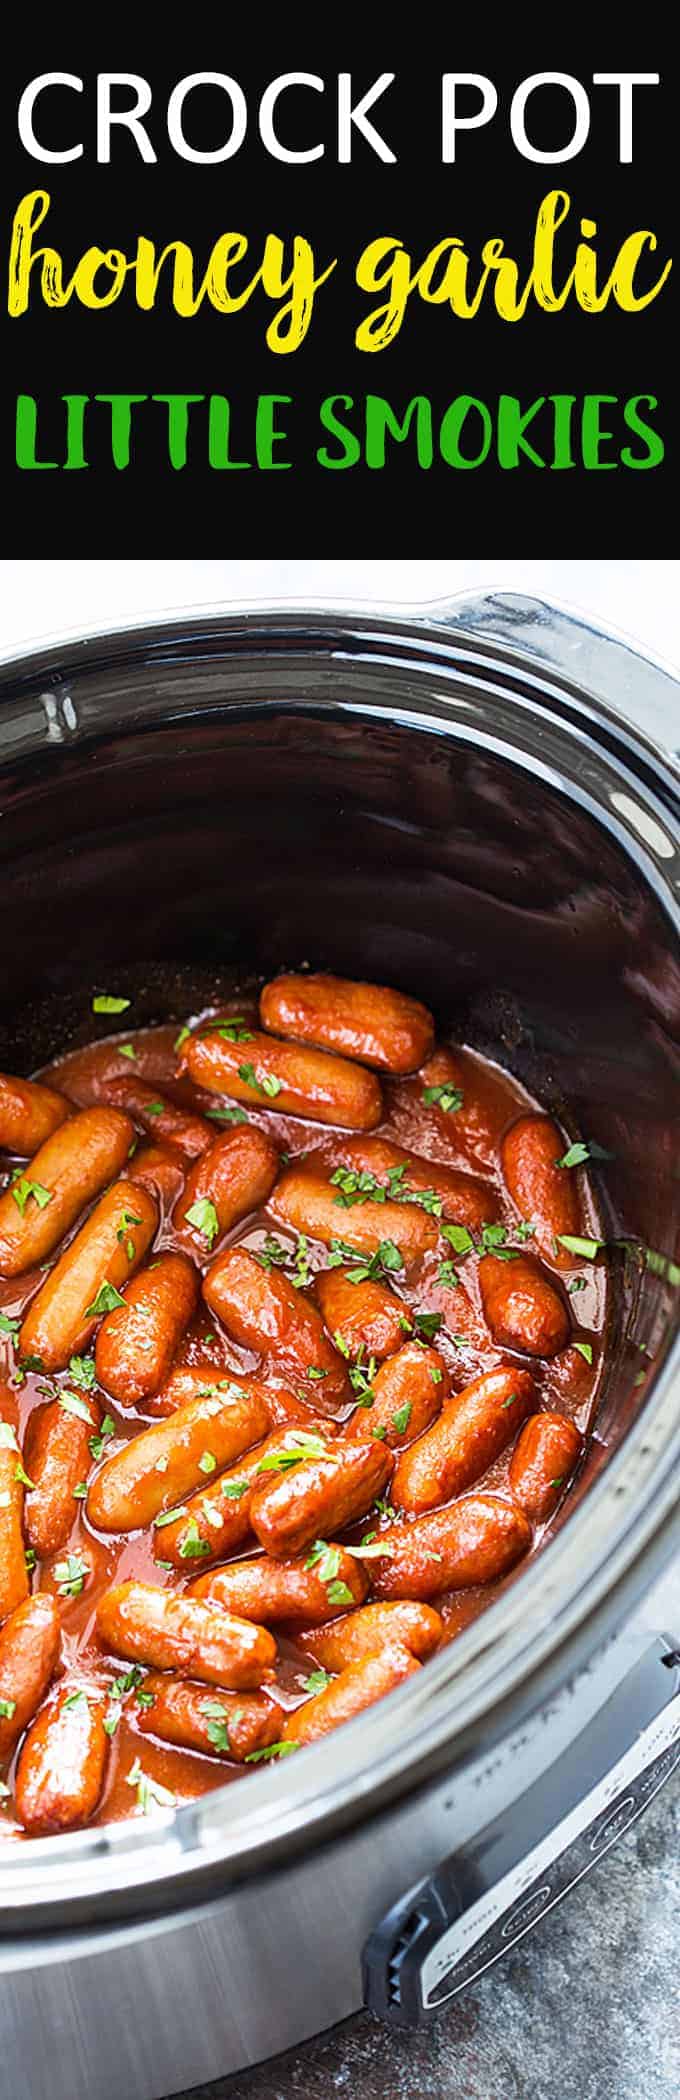 Cocktail sausages in sauce topped with chopped parsley in an oval slow cooker.